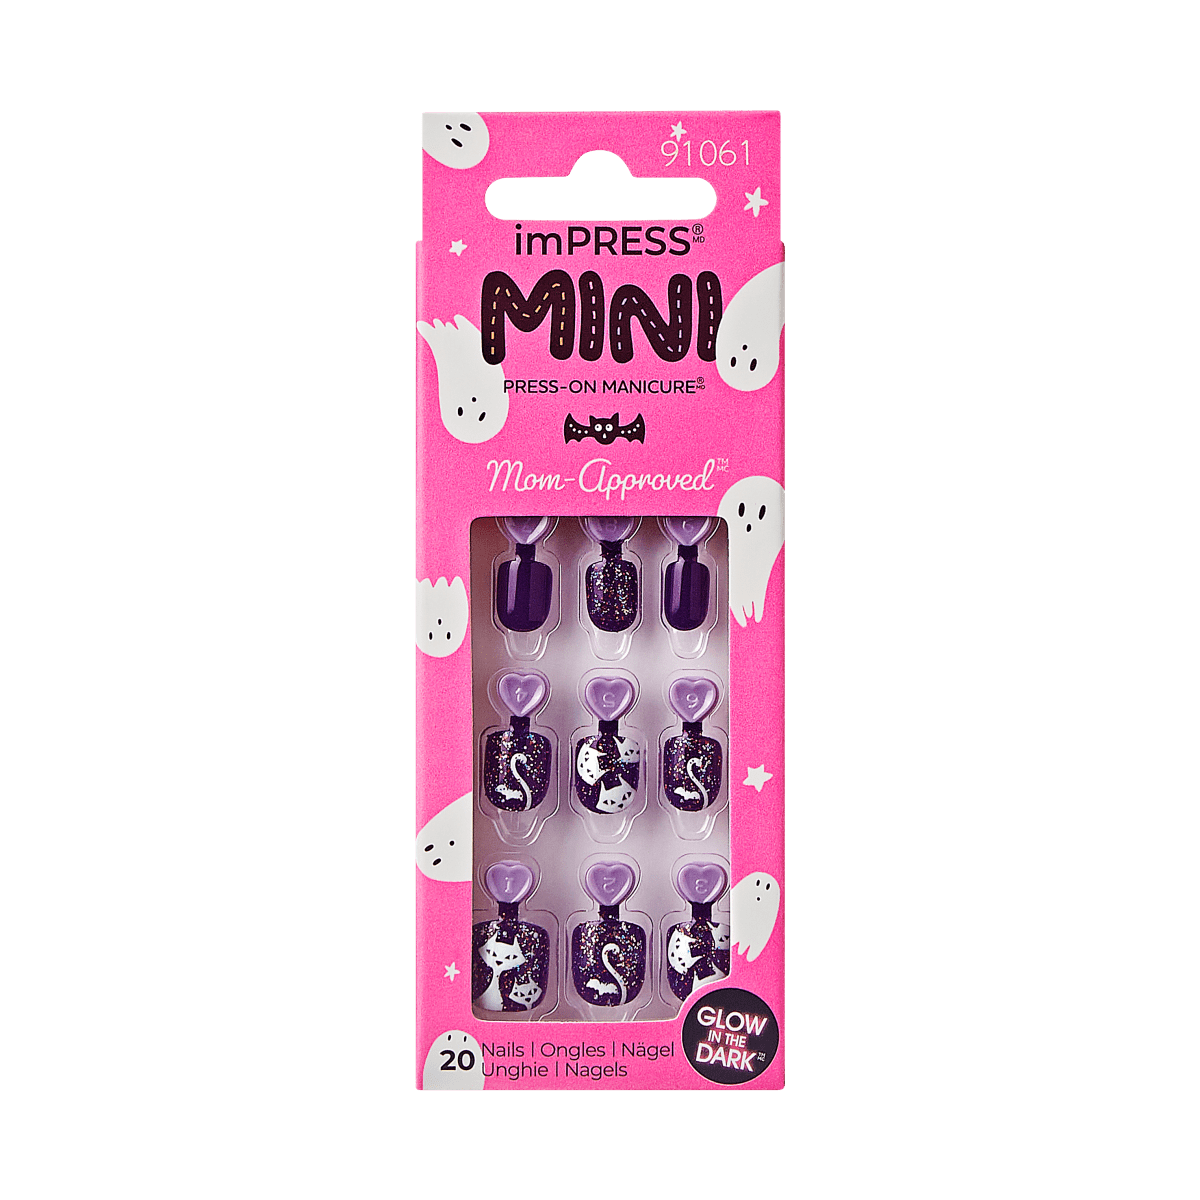 imPRESS MINI Halloween Press-On Manicure for Kids - In the Shadows